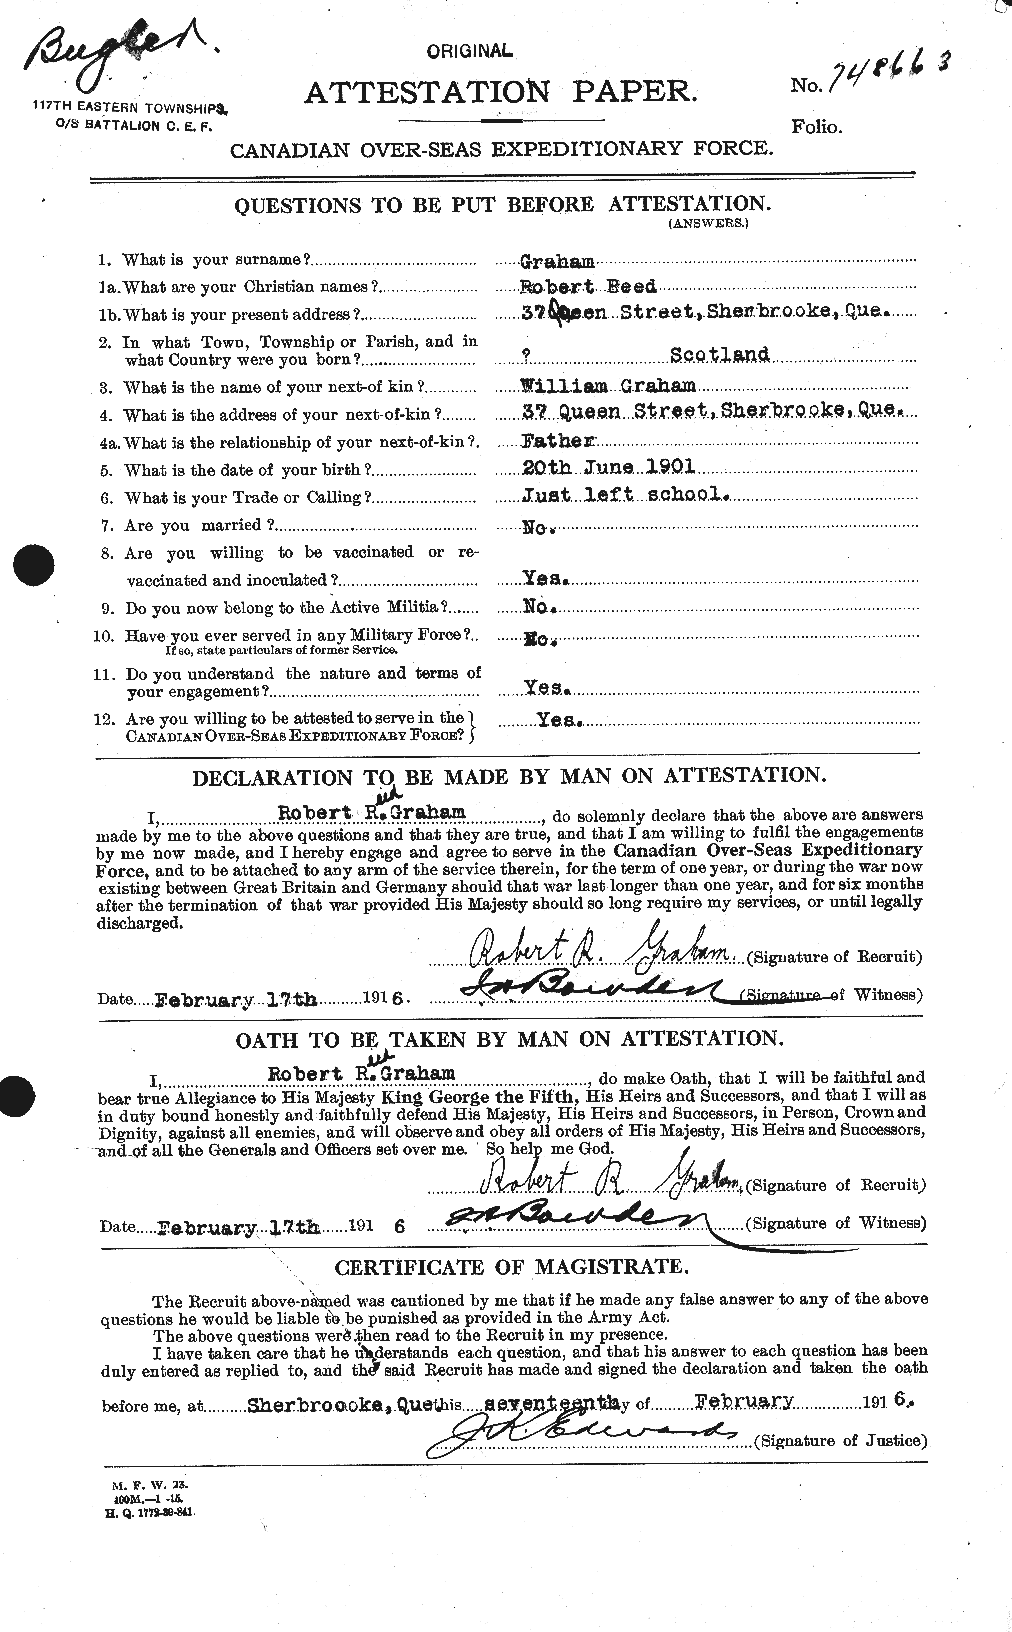 Personnel Records of the First World War - CEF 359420a